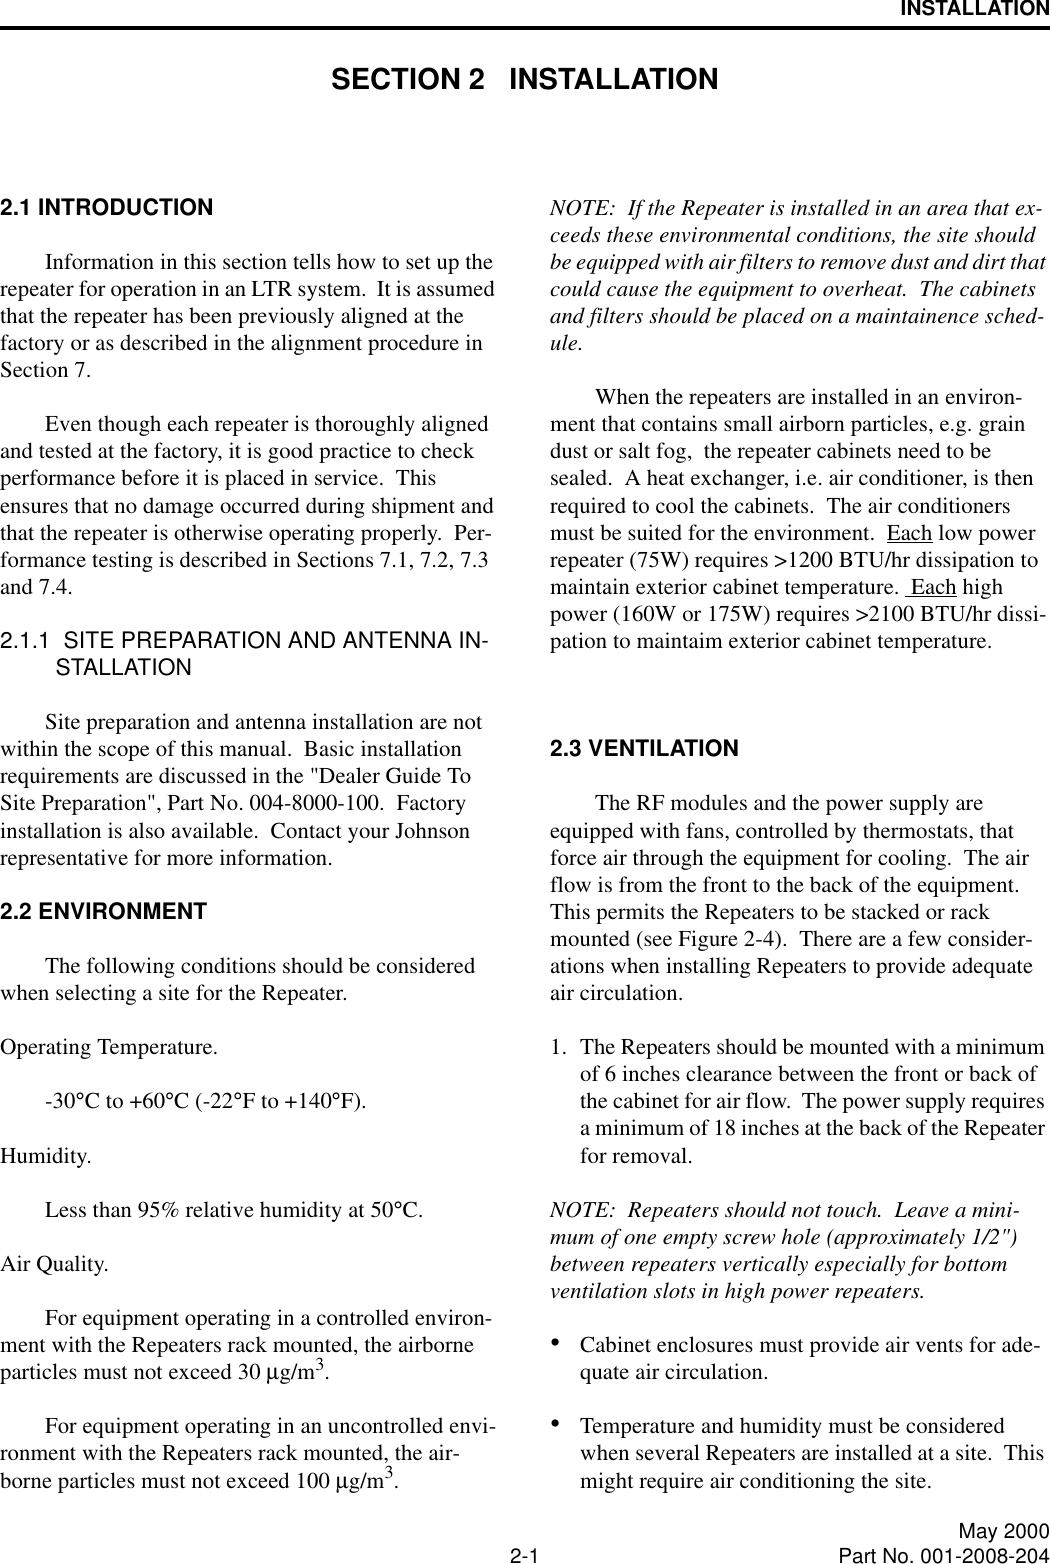 2-1 May 2000Part No. 001-2008-204INSTALLATIONSECTION 2   INSTALLATION2.1 INTRODUCTIONInformation in this section tells how to set up the repeater for operation in an LTR system.  It is assumed that the repeater has been previously aligned at the factory or as described in the alignment procedure in Section 7.Even though each repeater is thoroughly aligned and tested at the factory, it is good practice to check performance before it is placed in service.  This ensures that no damage occurred during shipment and that the repeater is otherwise operating properly.  Per-formance testing is described in Sections 7.1, 7.2, 7.3 and 7.4.2.1.1  SITE PREPARATION AND ANTENNA IN-STALLATIONSite preparation and antenna installation are not within the scope of this manual.  Basic installation requirements are discussed in the &quot;Dealer Guide To Site Preparation&quot;, Part No. 004-8000-100.  Factory installation is also available.  Contact your Johnson representative for more information.2.2 ENVIRONMENTThe following conditions should be considered when selecting a site for the Repeater.Operating Temperature.-30°C to +60°C (-22°F to +140°F).      Humidity.Less than 95% relative humidity at 50°C.Air Quality.For equipment operating in a controlled environ-ment with the Repeaters rack mounted, the airborne particles must not exceed 30 µg/m3.For equipment operating in an uncontrolled envi-ronment with the Repeaters rack mounted, the air-borne particles must not exceed 100 µg/m3.NOTE:  If the Repeater is installed in an area that ex-ceeds these environmental conditions, the site should be equipped with air filters to remove dust and dirt that could cause the equipment to overheat.  The cabinets and filters should be placed on a maintainence sched-ule.When the repeaters are installed in an environ-ment that contains small airborn particles, e.g. grain dust or salt fog,  the repeater cabinets need to be sealed.  A heat exchanger, i.e. air conditioner, is then required to cool the cabinets.  The air conditioners must be suited for the environment.  Each low power repeater (75W) requires &gt;1200 BTU/hr dissipation to maintain exterior cabinet temperature.  Each high power (160W or 175W) requires &gt;2100 BTU/hr dissi-pation to maintaim exterior cabinet temperature.2.3 VENTILATIONThe RF modules and the power supply are equipped with fans, controlled by thermostats, that force air through the equipment for cooling.  The air flow is from the front to the back of the equipment.  This permits the Repeaters to be stacked or rack mounted (see Figure 2-4).  There are a few consider-ations when installing Repeaters to provide adequate air circulation.1. The Repeaters should be mounted with a minimum of 6 inches clearance between the front or back of the cabinet for air flow.  The power supply requires a minimum of 18 inches at the back of the Repeater for removal.NOTE:  Repeaters should not touch.  Leave a mini-mum of one empty screw hole (approximately 1/2&quot;) between repeaters vertically especially for bottom ventilation slots in high power repeaters.•Cabinet enclosures must provide air vents for ade-quate air circulation.•Temperature and humidity must be considered when several Repeaters are installed at a site.  This might require air conditioning the site.